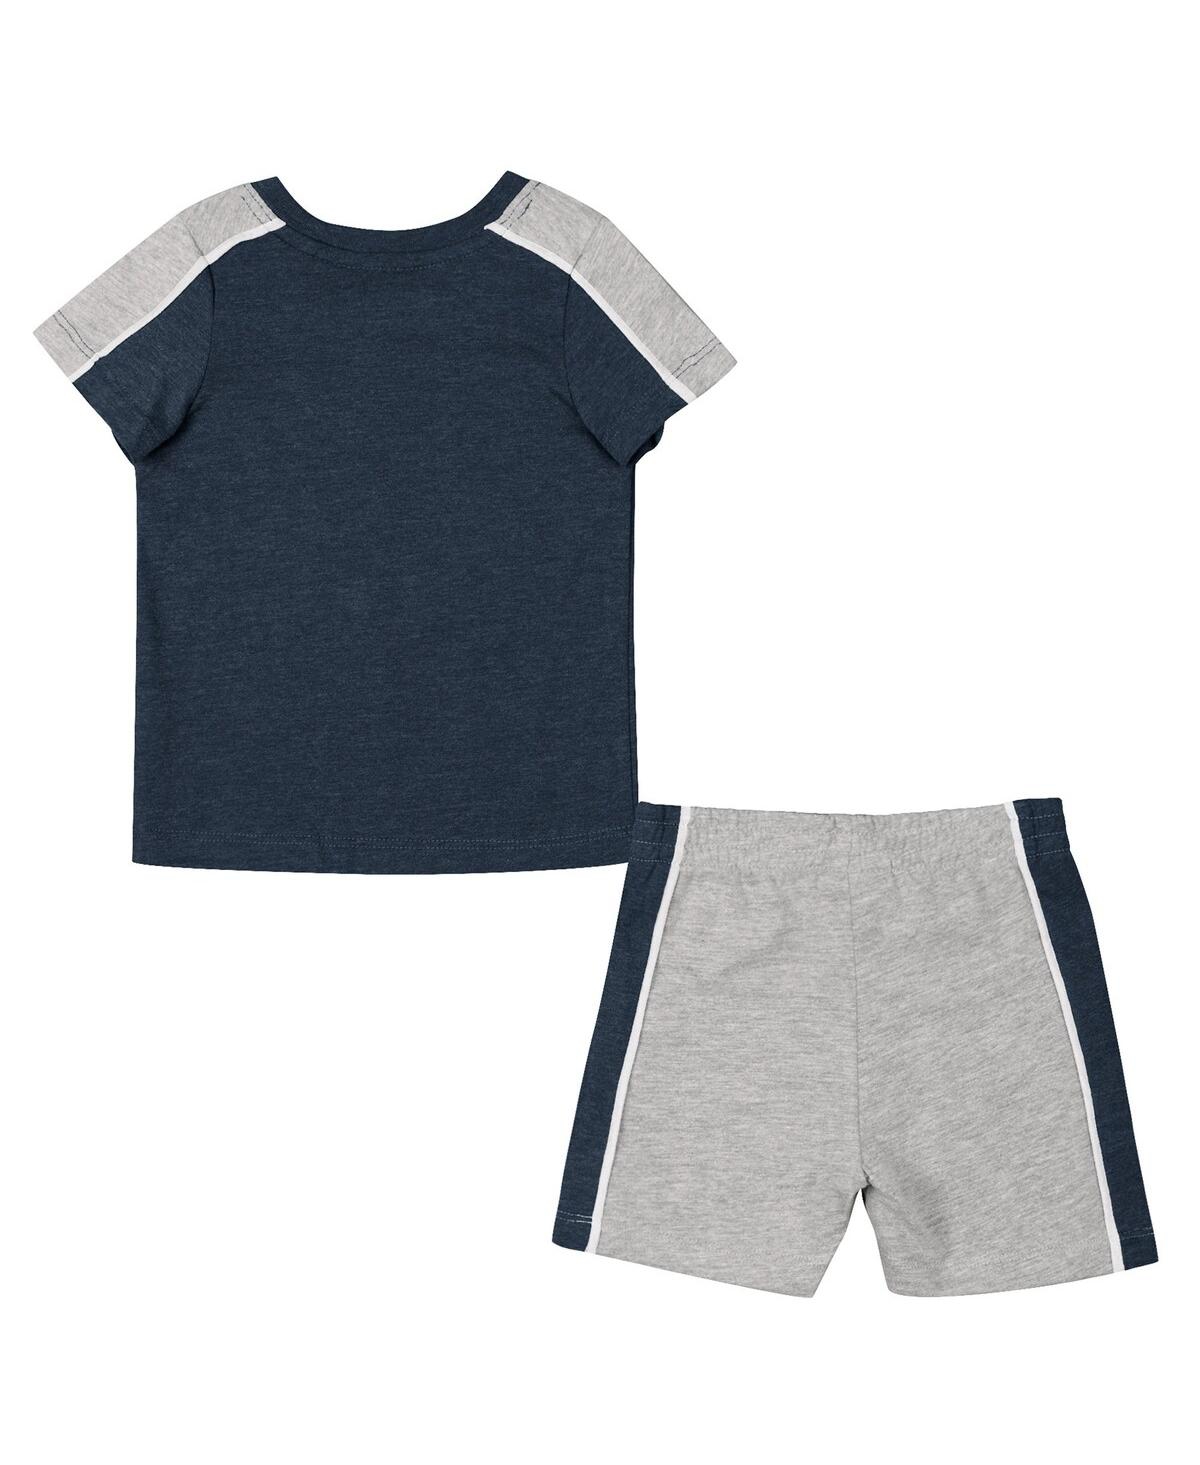 Shop Colosseum Infant Boys And Girls  Navy, Heather Gray Penn State Nittany Lions Norman T-shirt And Short In Navy,heather Gray